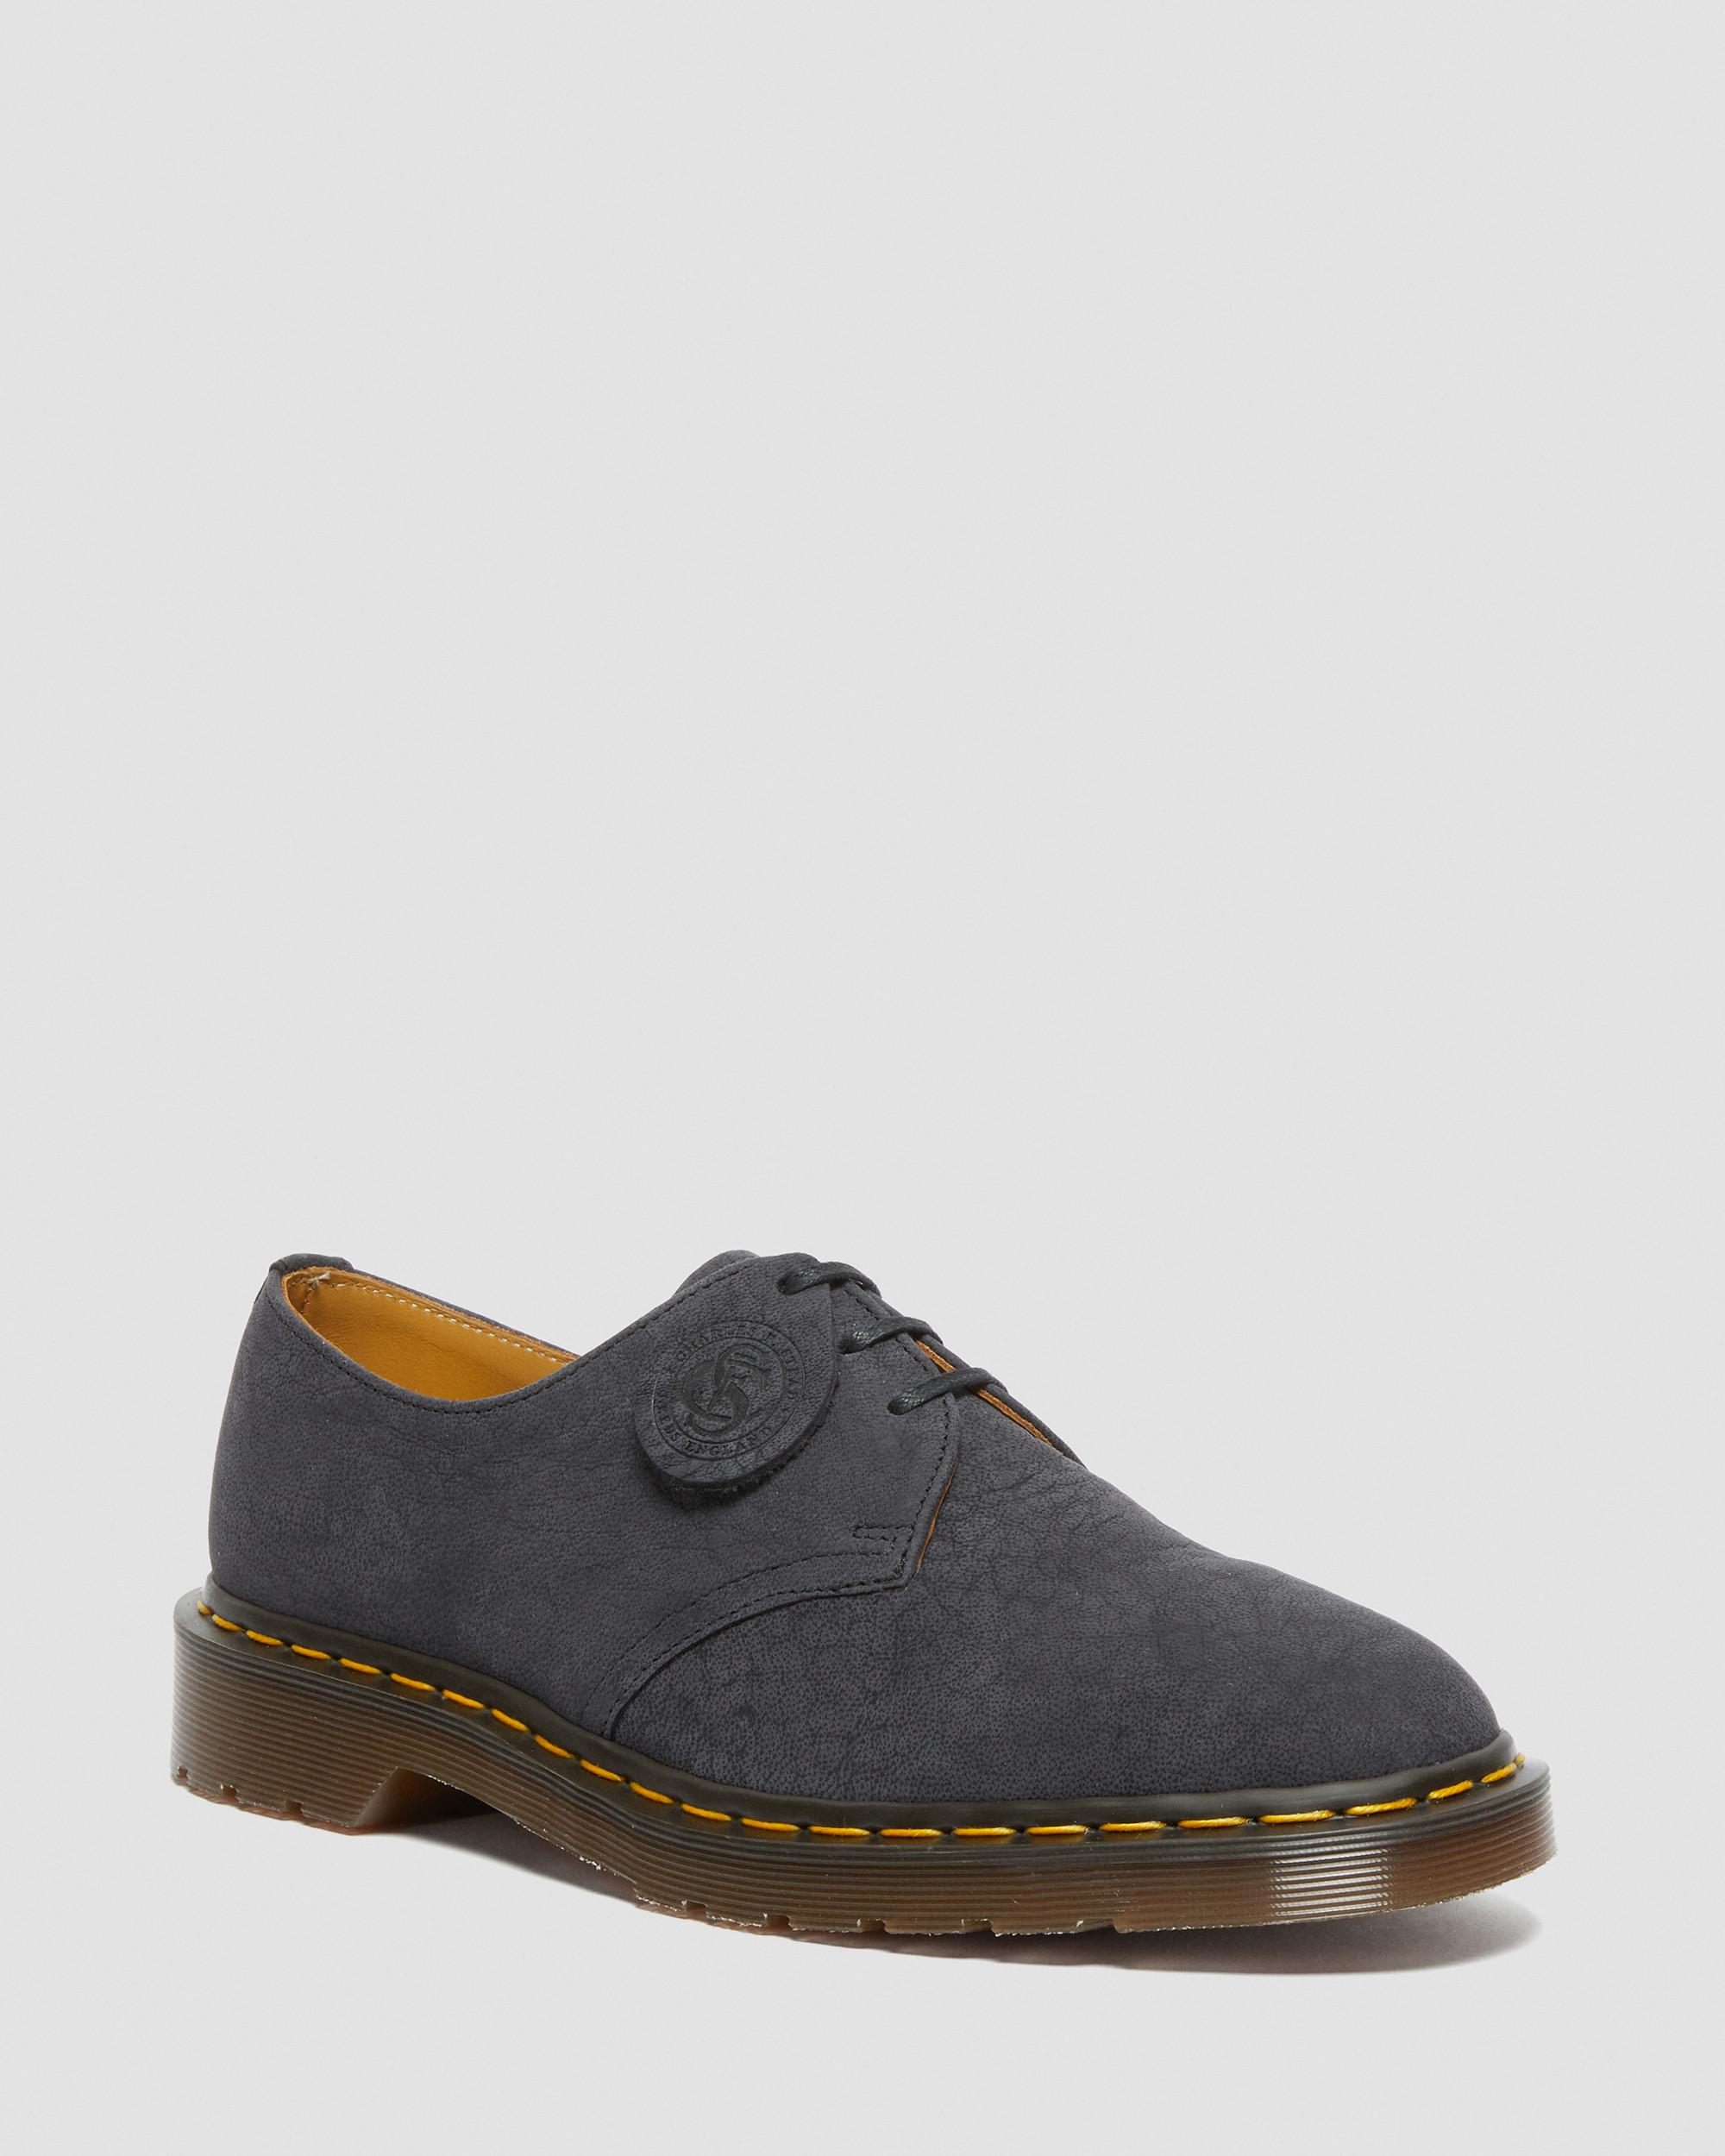 1461 Made in England Nubuck Leather Oxford Shoes in Black